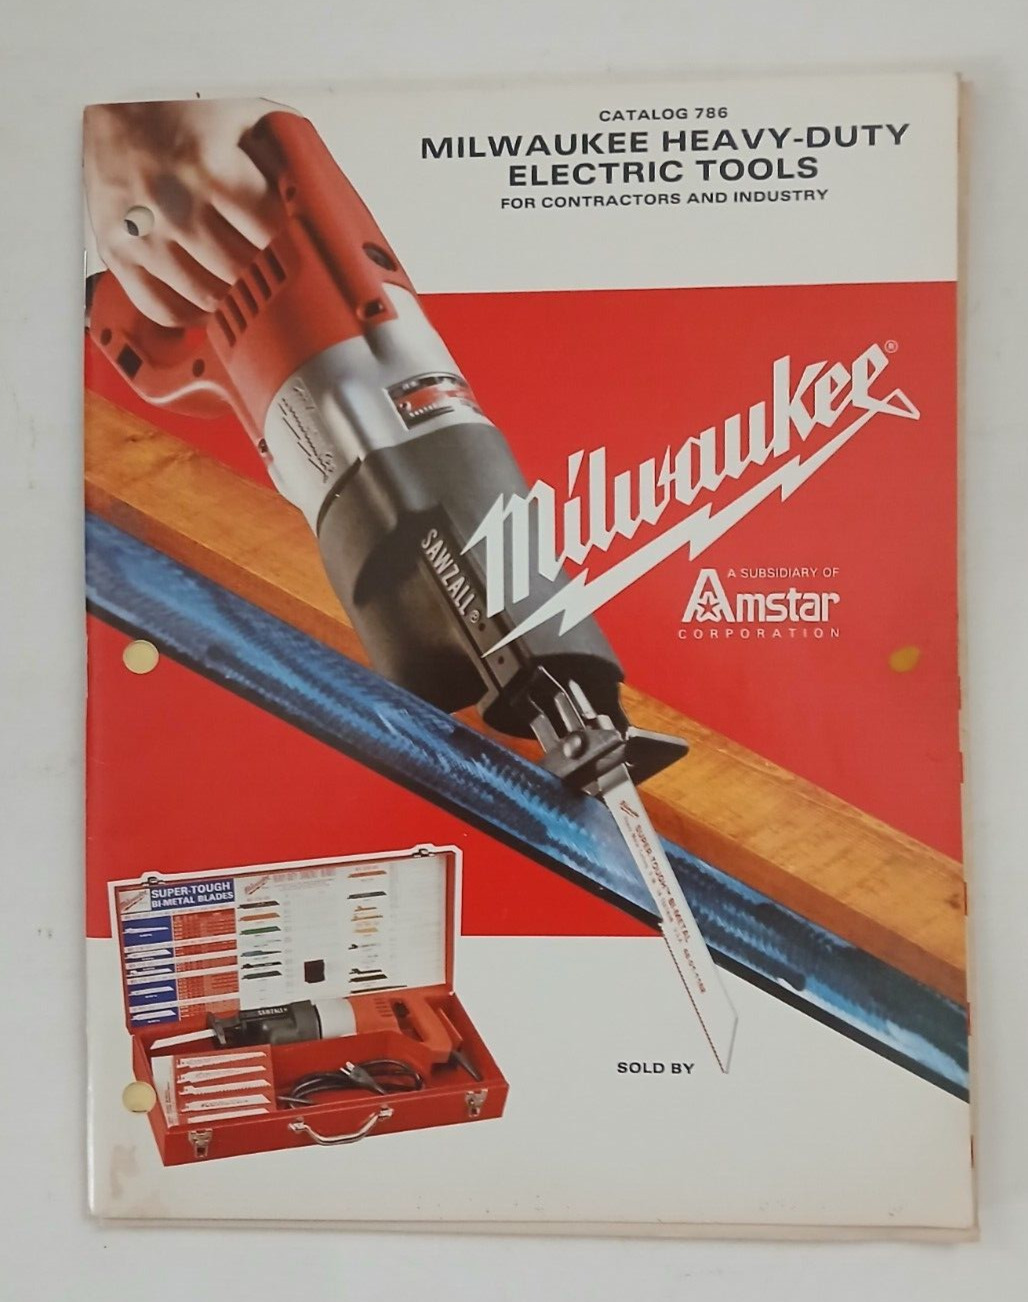 Vtg Milwaukee Heavy-Duty Electric Tools for Contractors and Industry Catalog 786